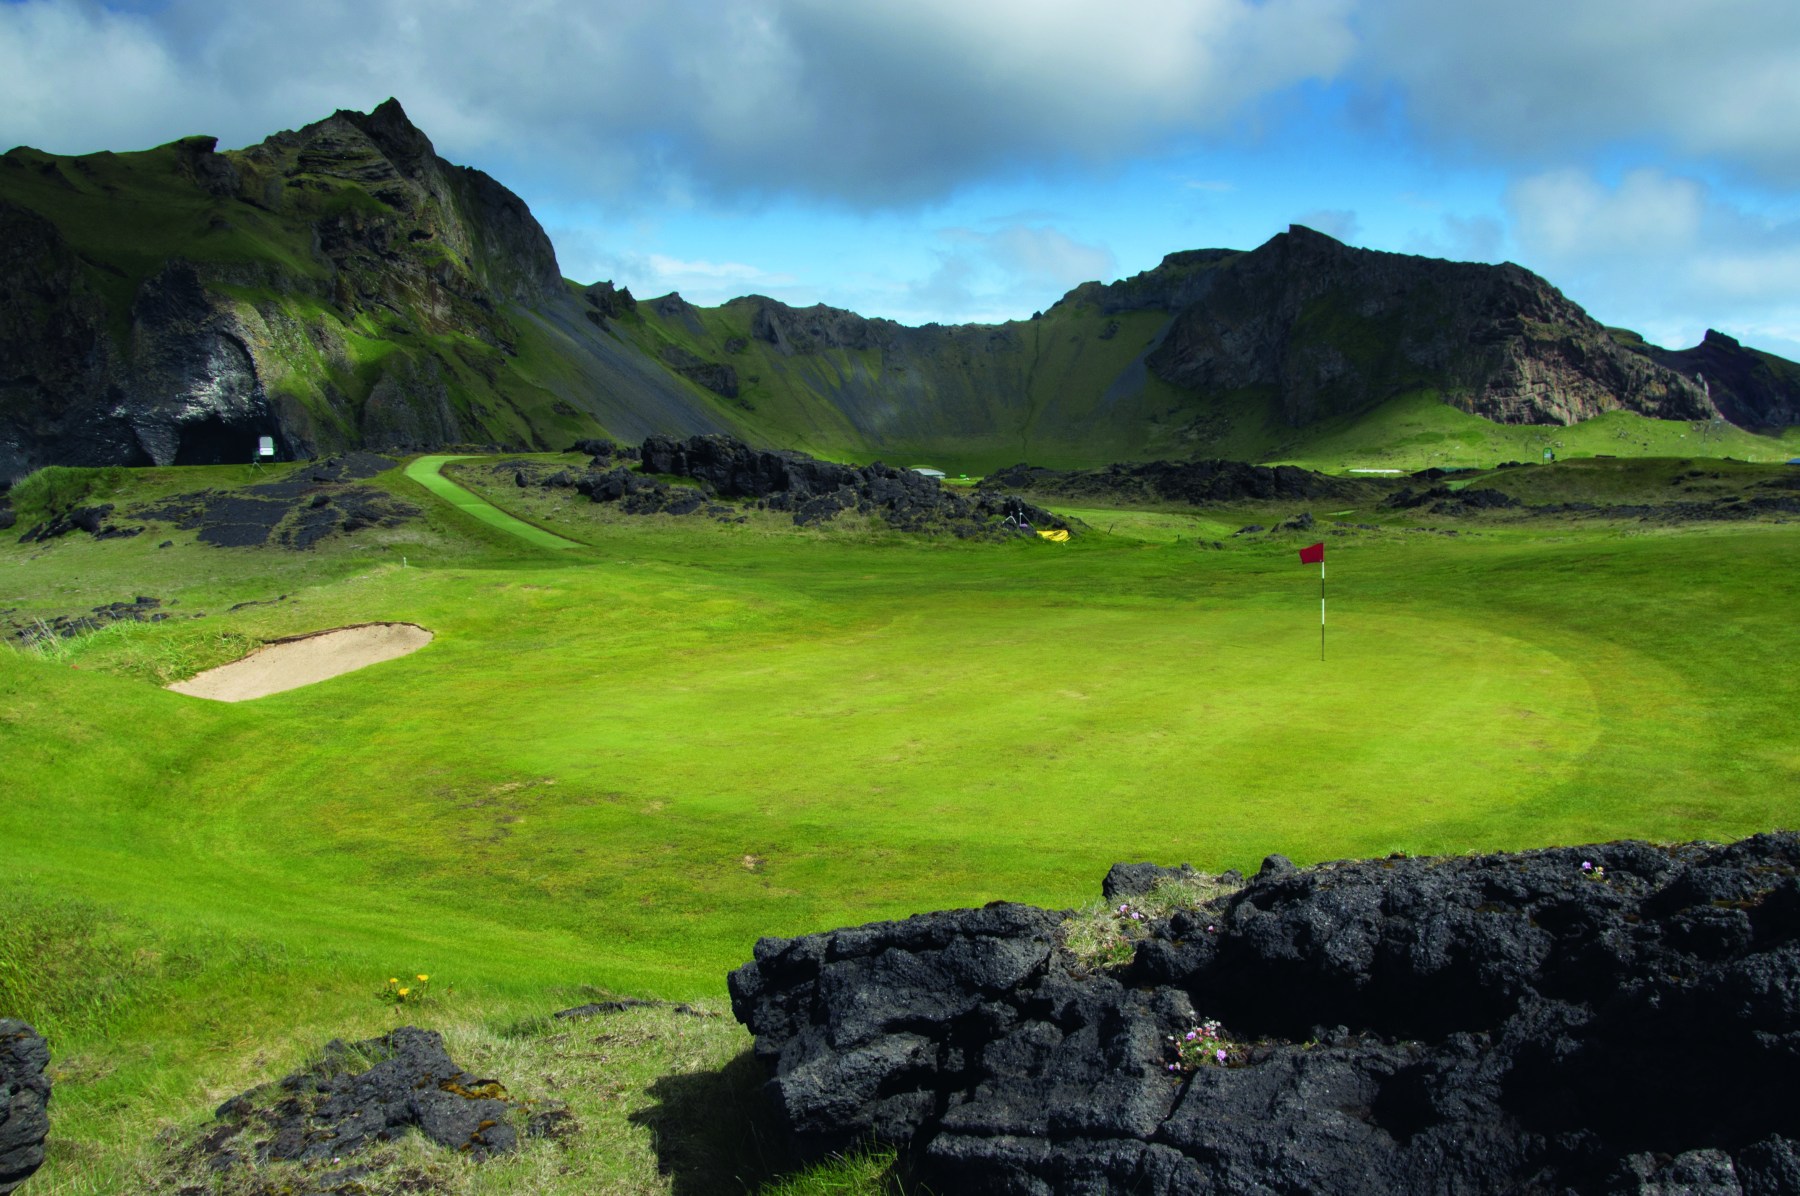 <strong>WESTMAN ISLANDS GOLF CLUB</strong>, Iceland. You’ll be golfing in an old volcano.<br><br>Waldek says: “Iceland is the land of fire and ice, but when you’re golfing at the Westman on Heimaey Island, it’s definitely more fire than ice. Or at least it used to be — the course is built into an old volcano. But don’t worry, it’s extinct, so you probably don’t have to worry about any lava hazards. A neighboring volcano on the island did erupt in 1973.”<br>